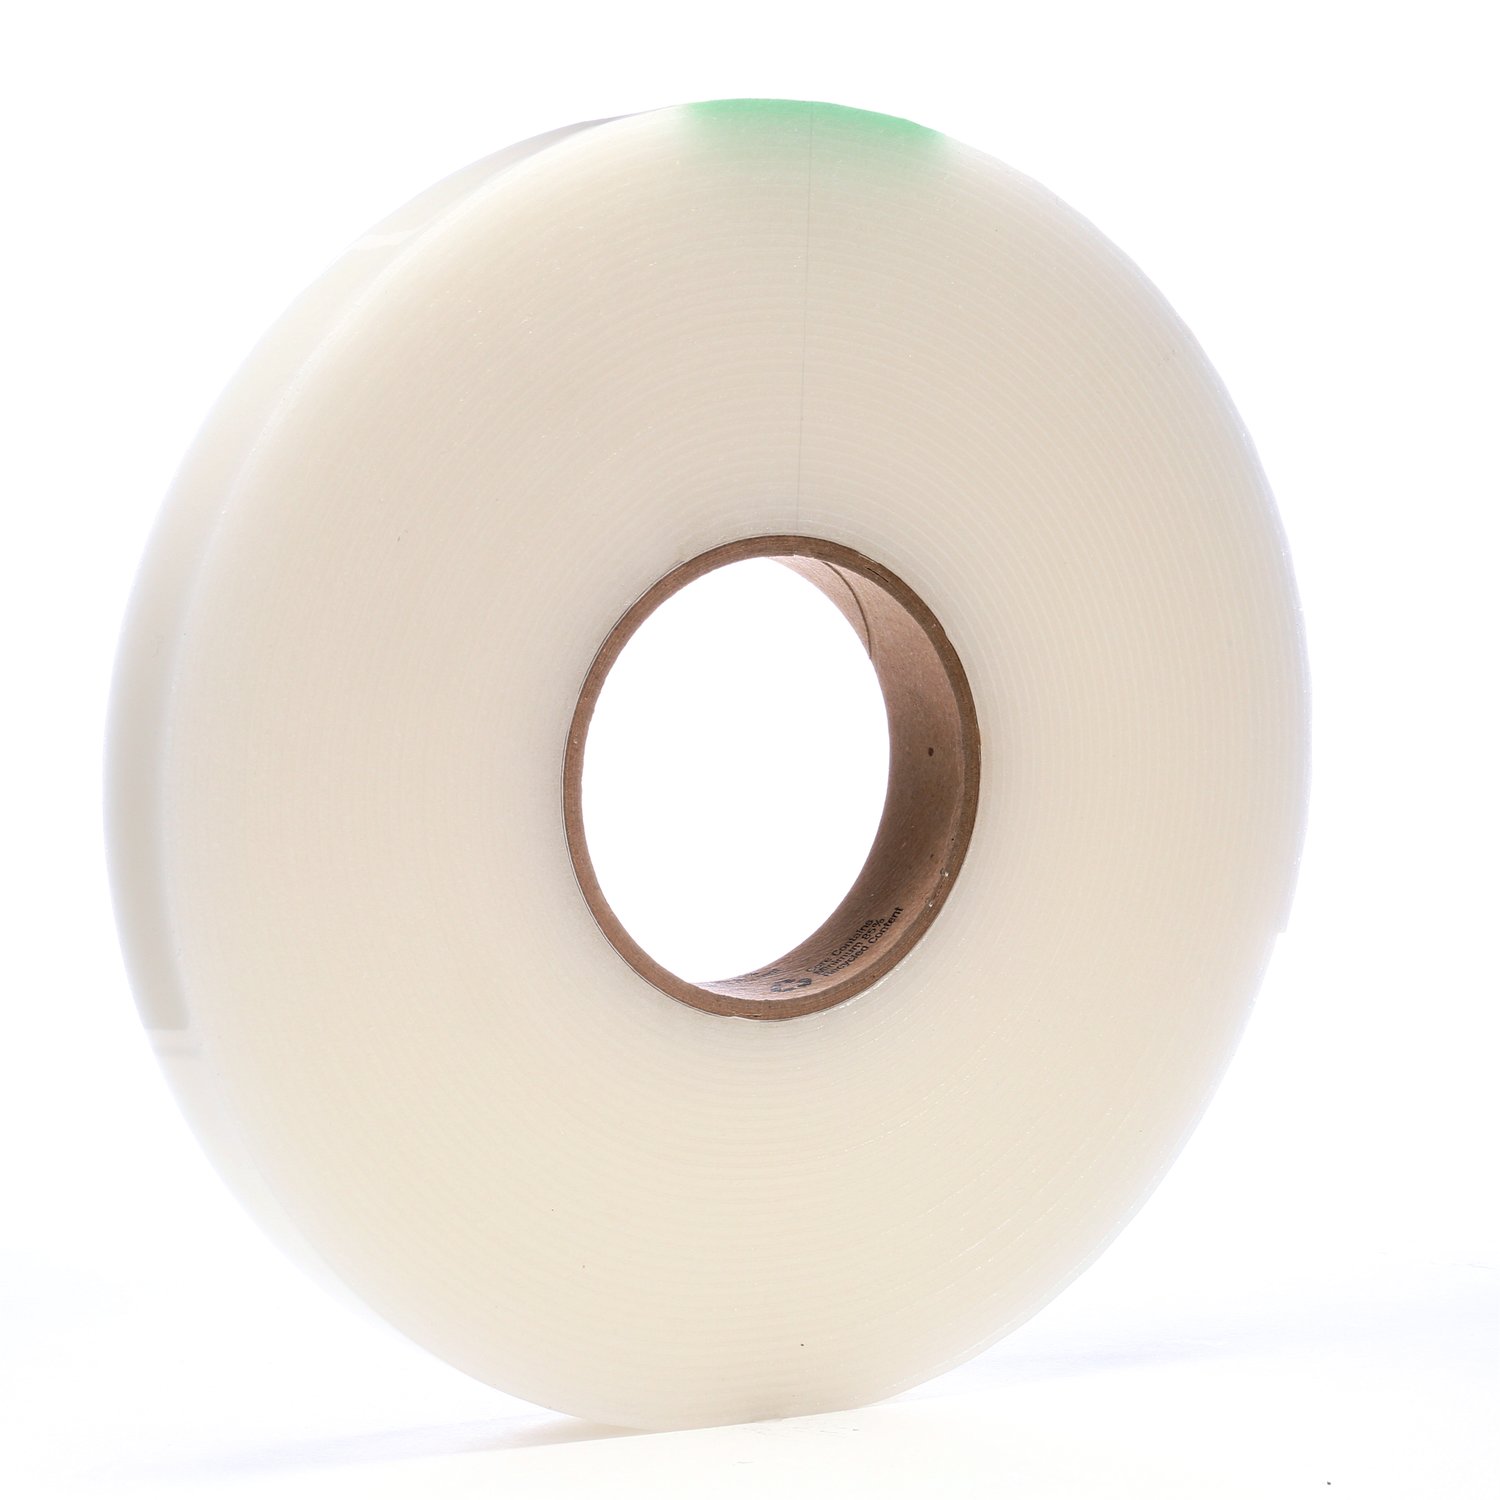 7000029082 - 3M Extreme Sealing Tape 4412N, Translucent, 1 in x 18 yd, 80 mil, 9
rolls per case